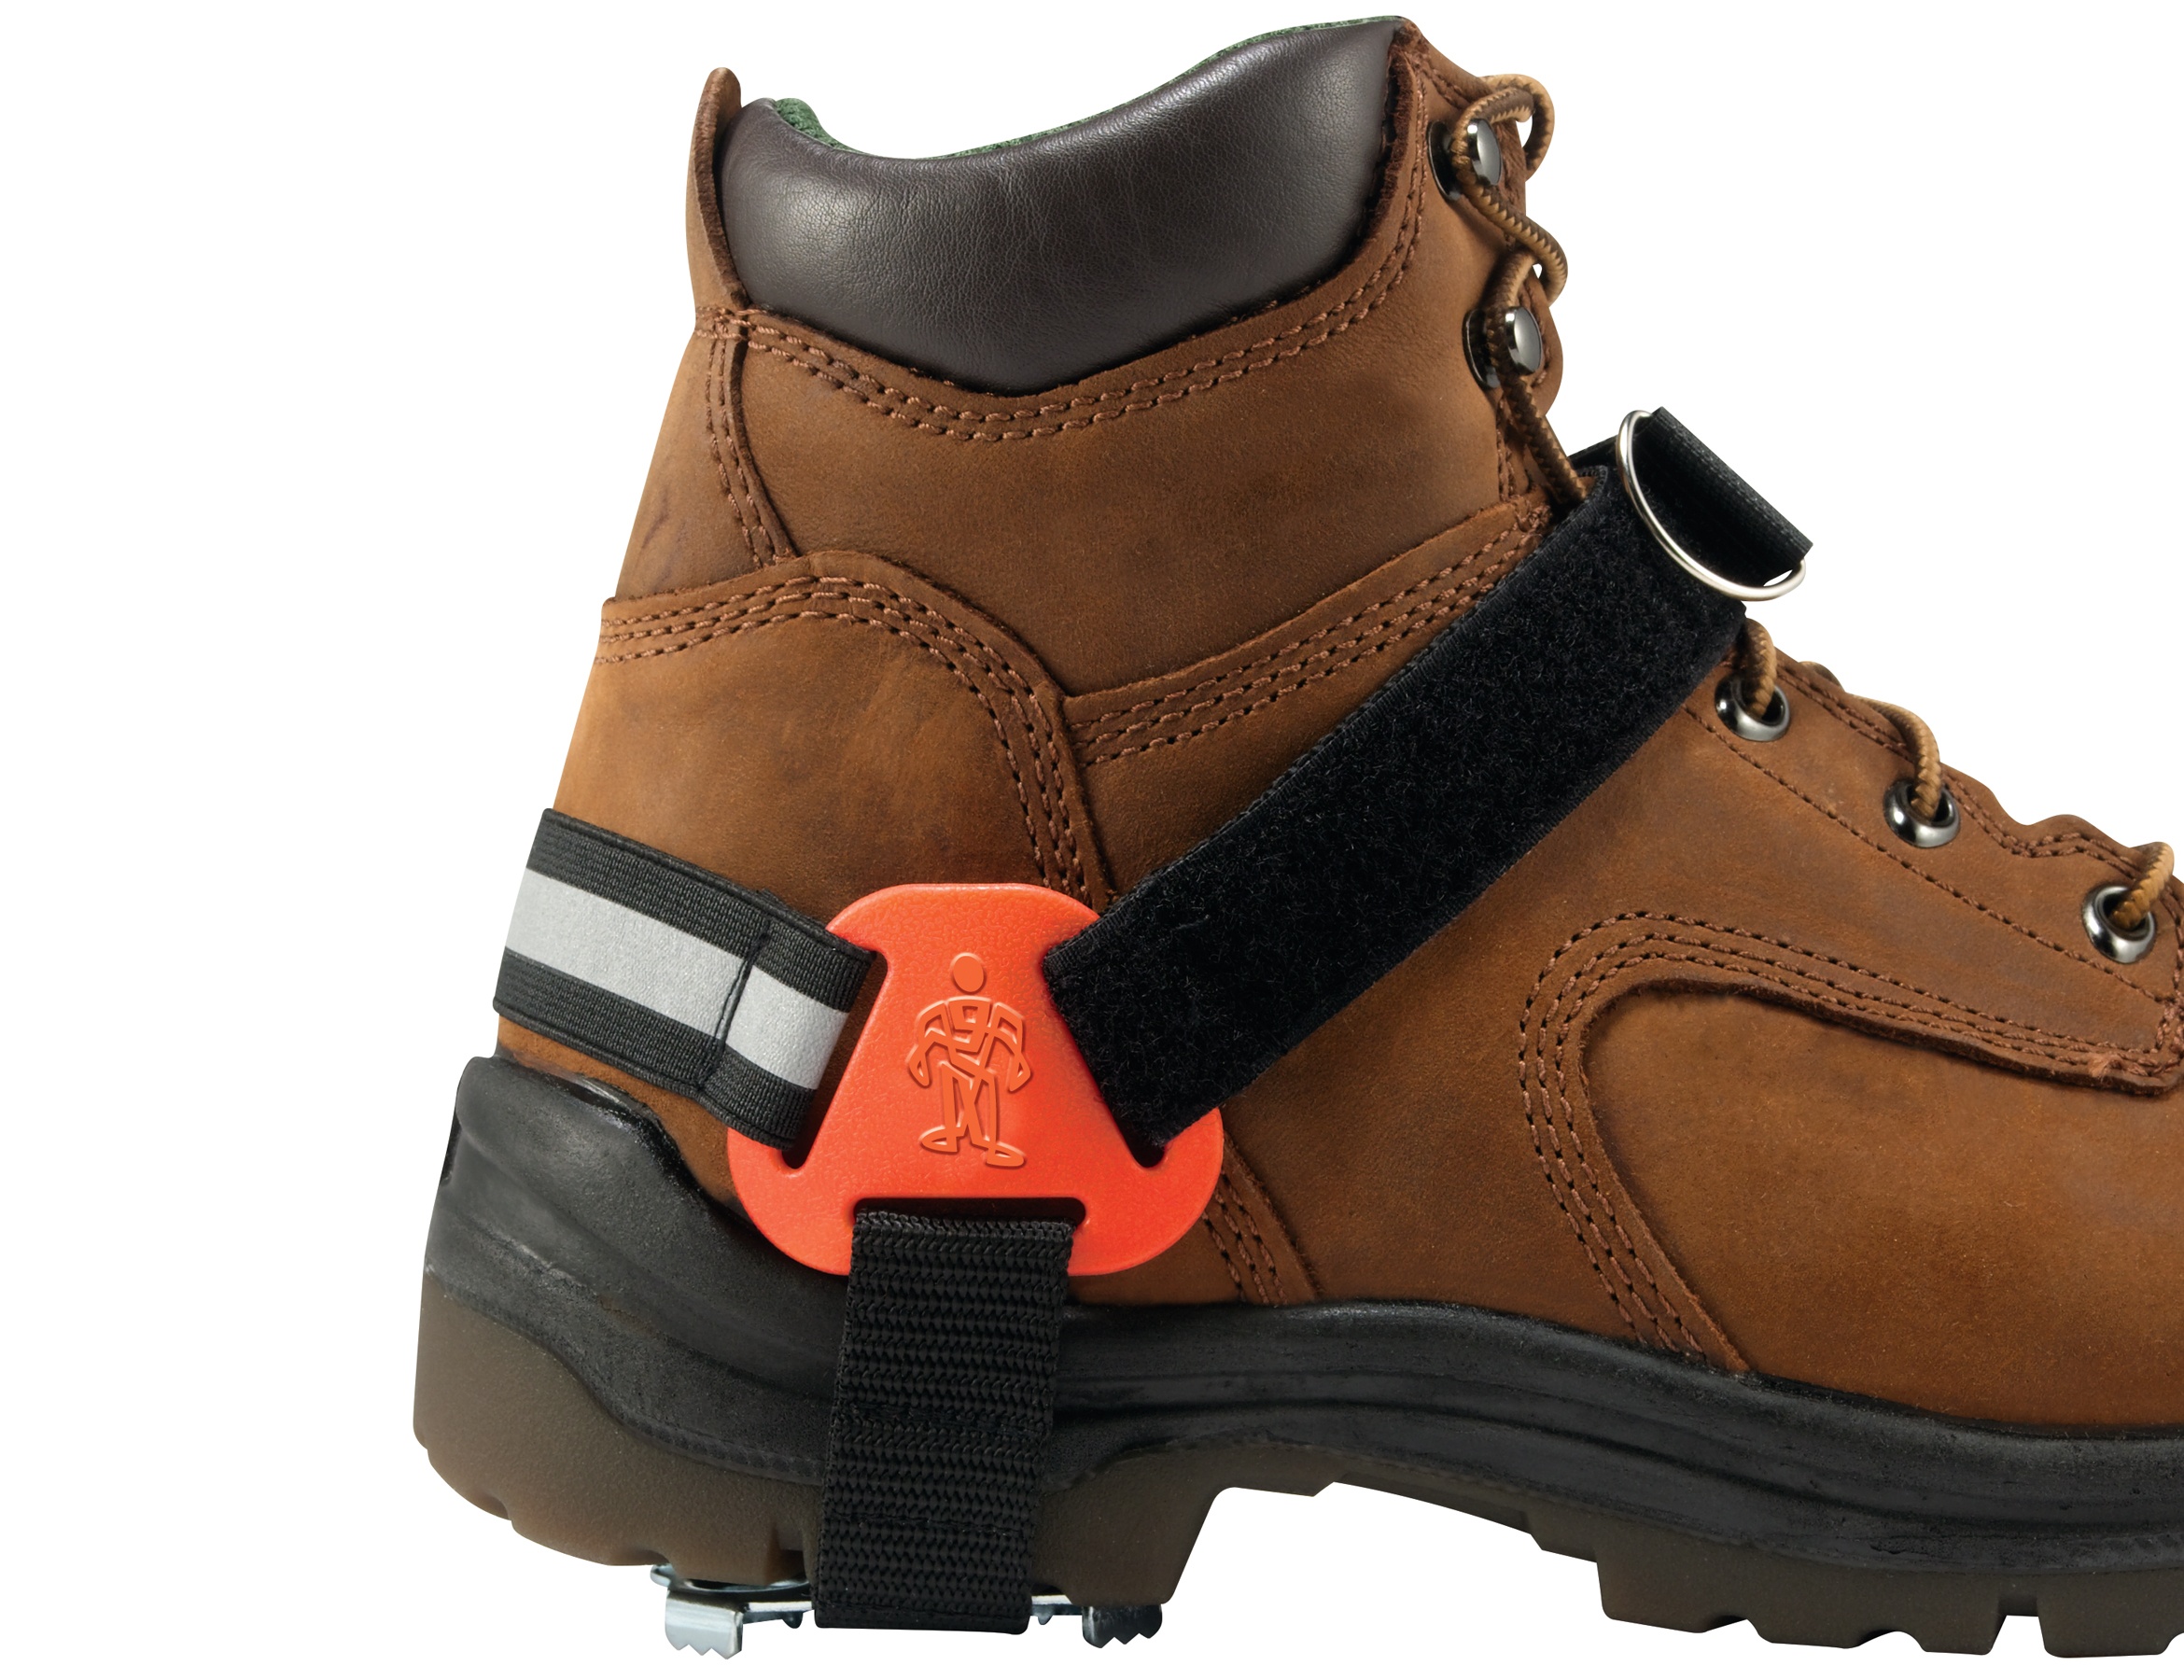 Ergodyne 6315 Trex Strap-On Heel Ice Traction Device from GME Supply